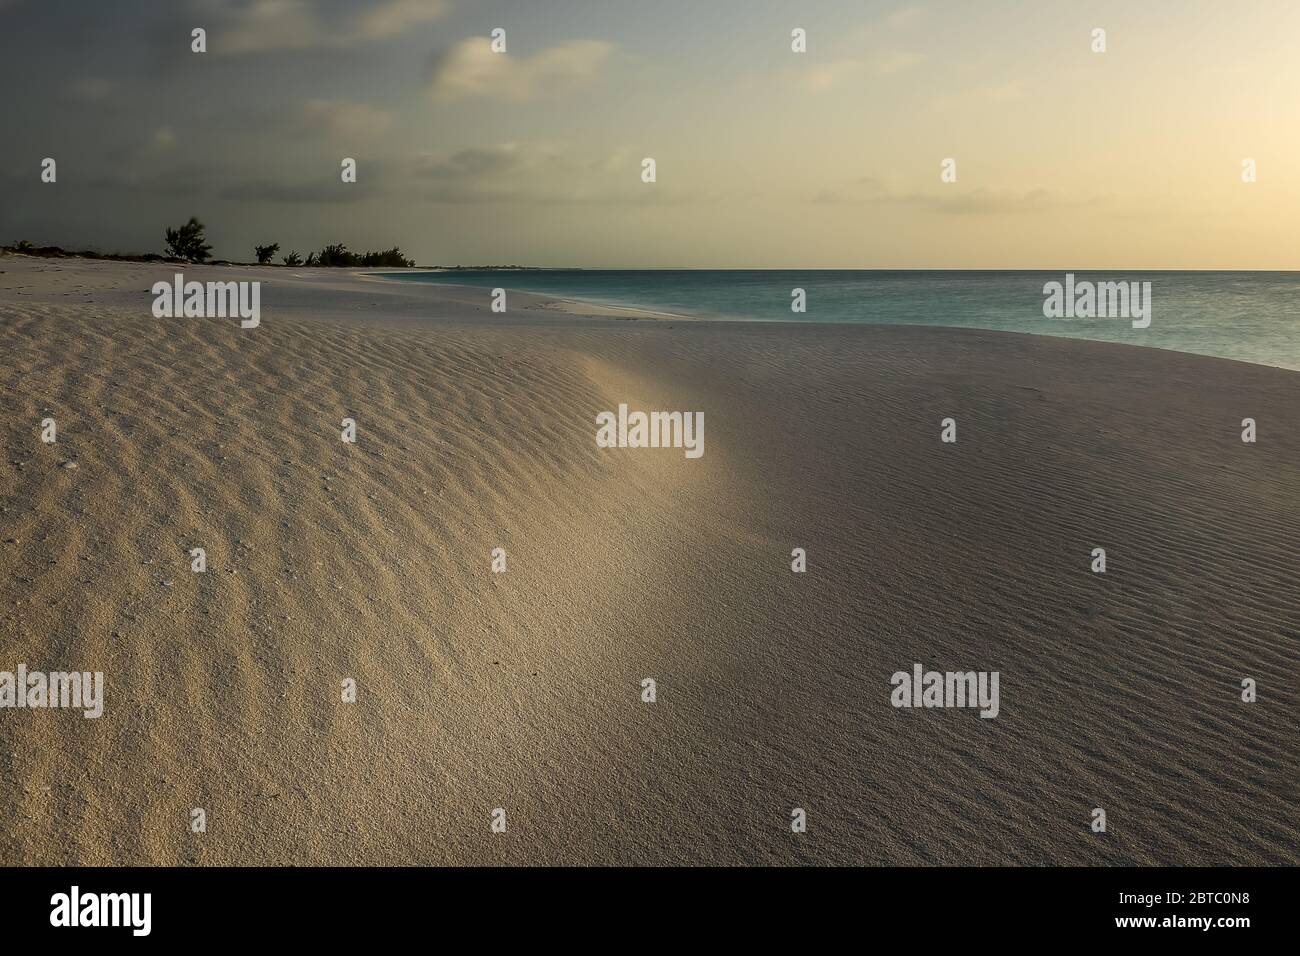 A white sandy beach at sunset, Pine Cay, Turks and Caicos, June 2019 Stock Photo